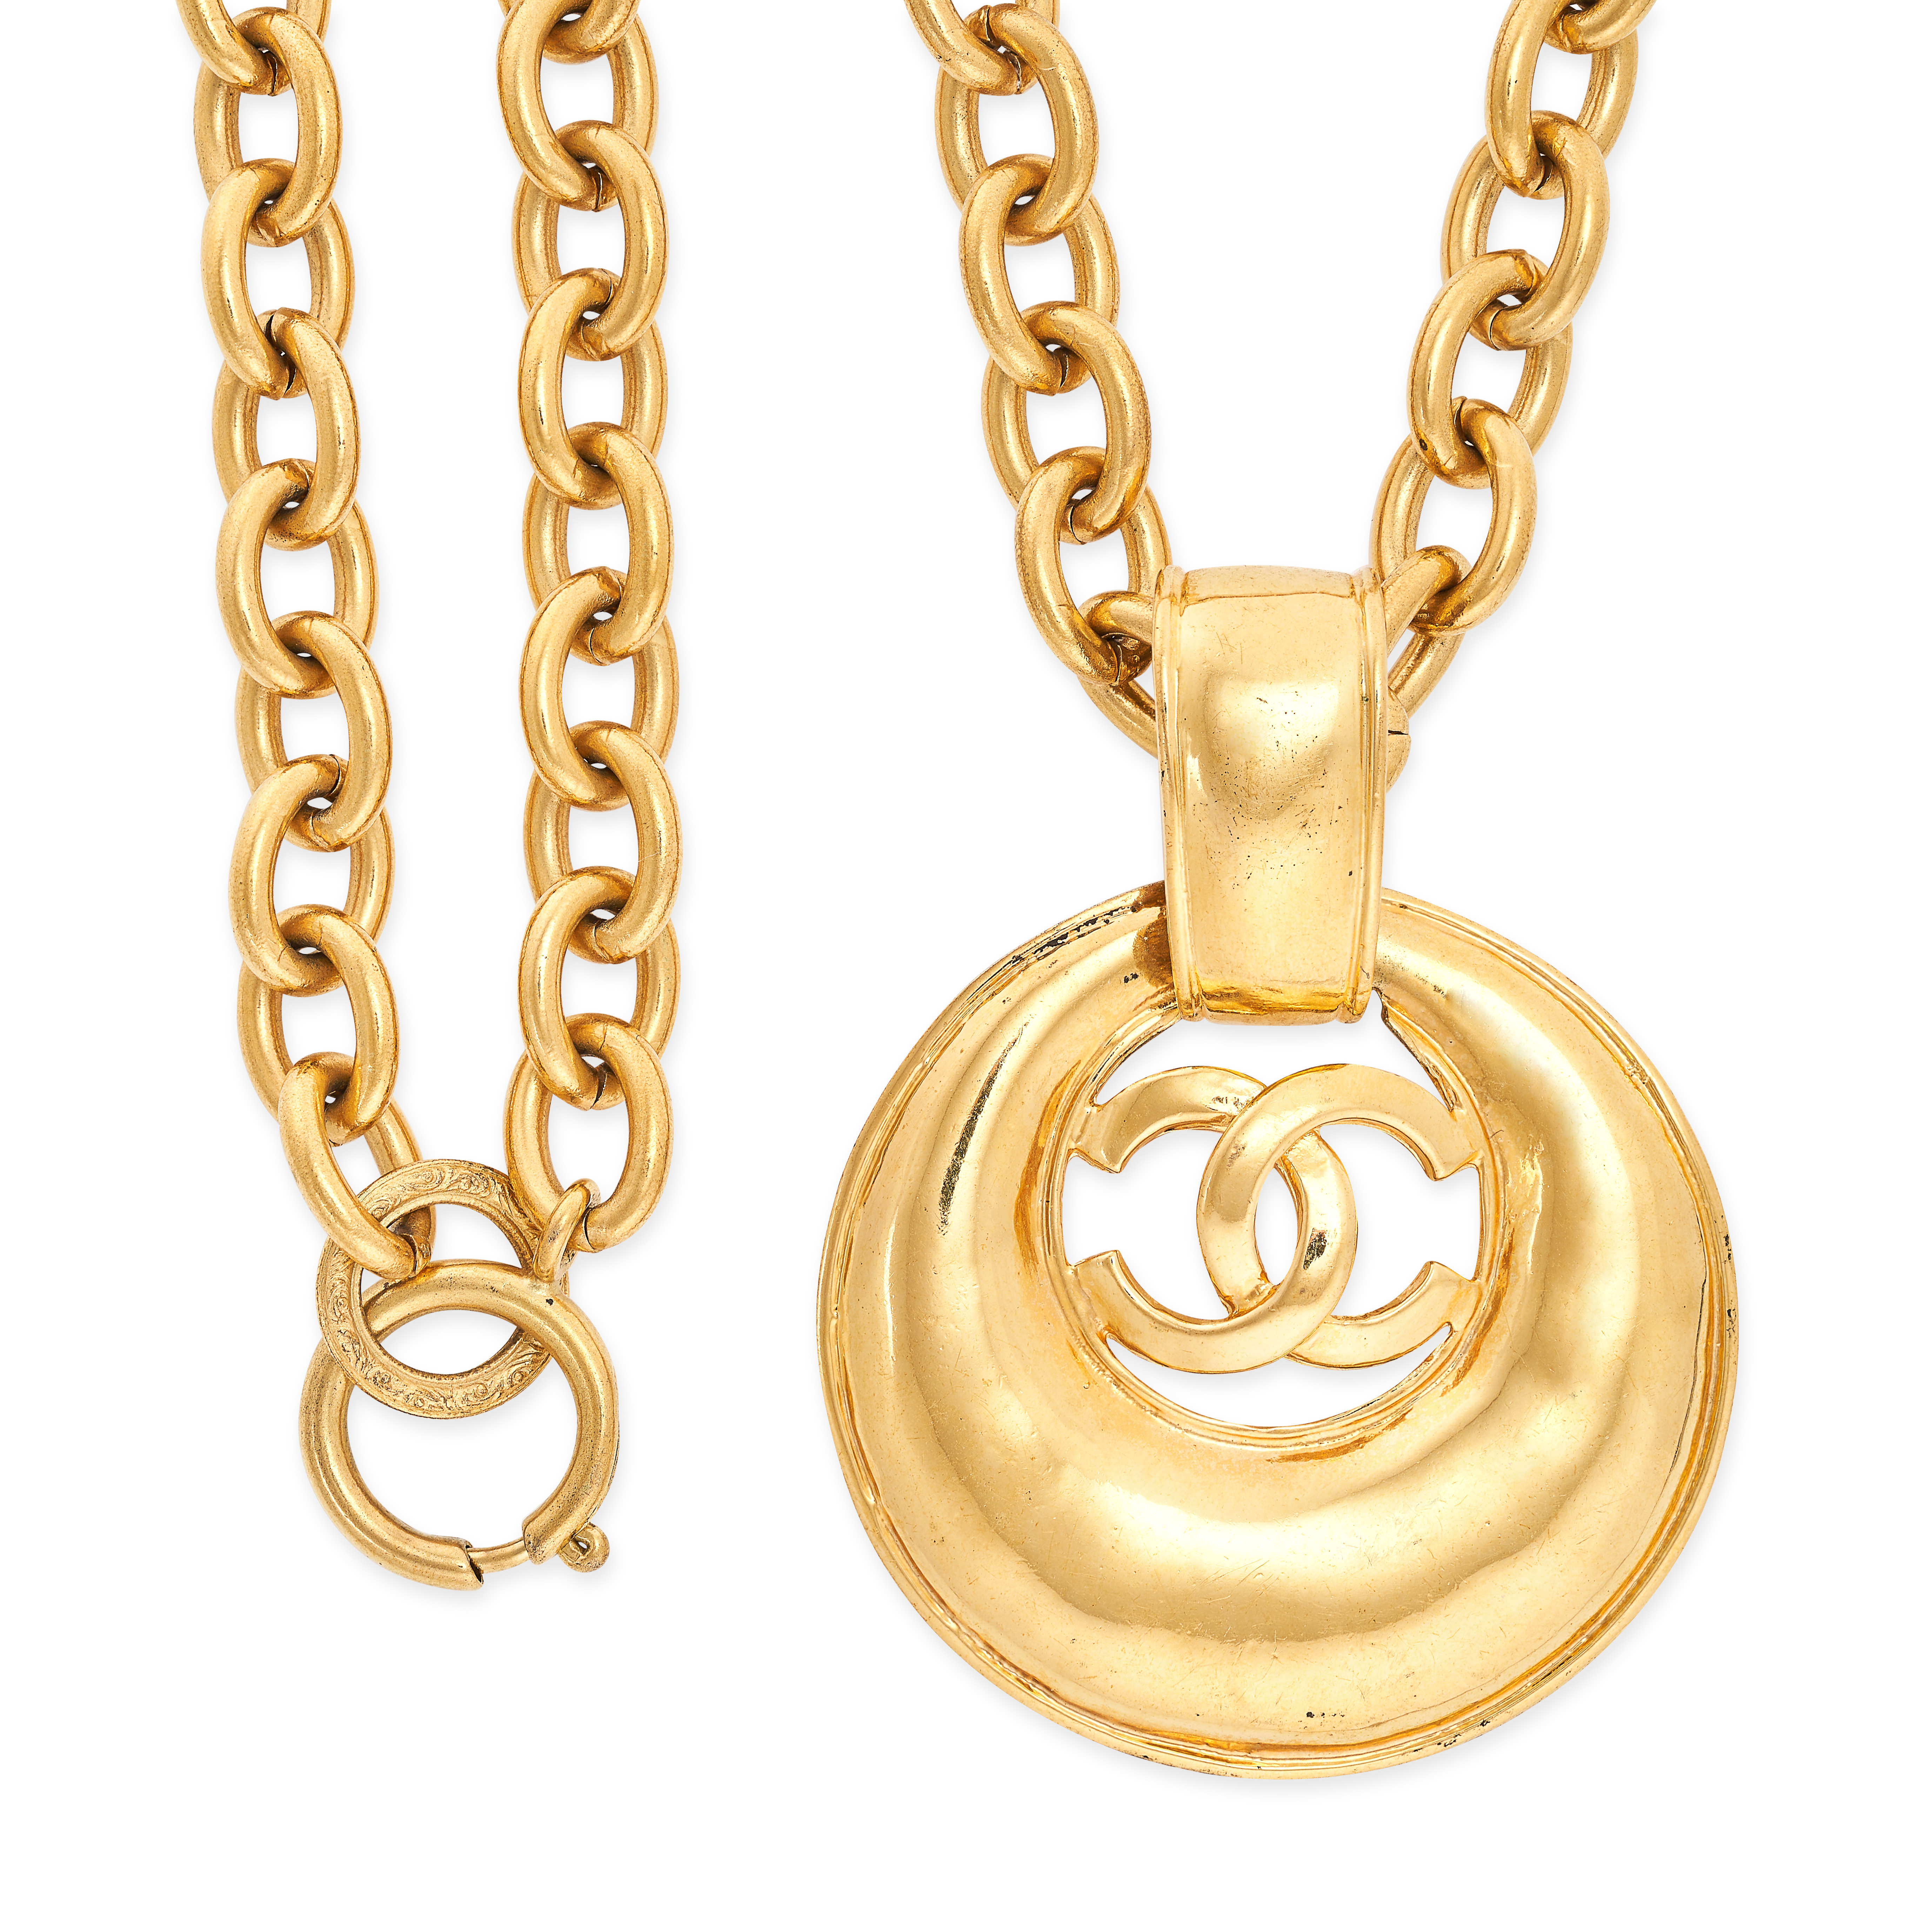 CHANEL, A VINTAGE PENDANT AND CHAIN comprising a circular pendant with two interlocking CC motifs, - Image 2 of 2